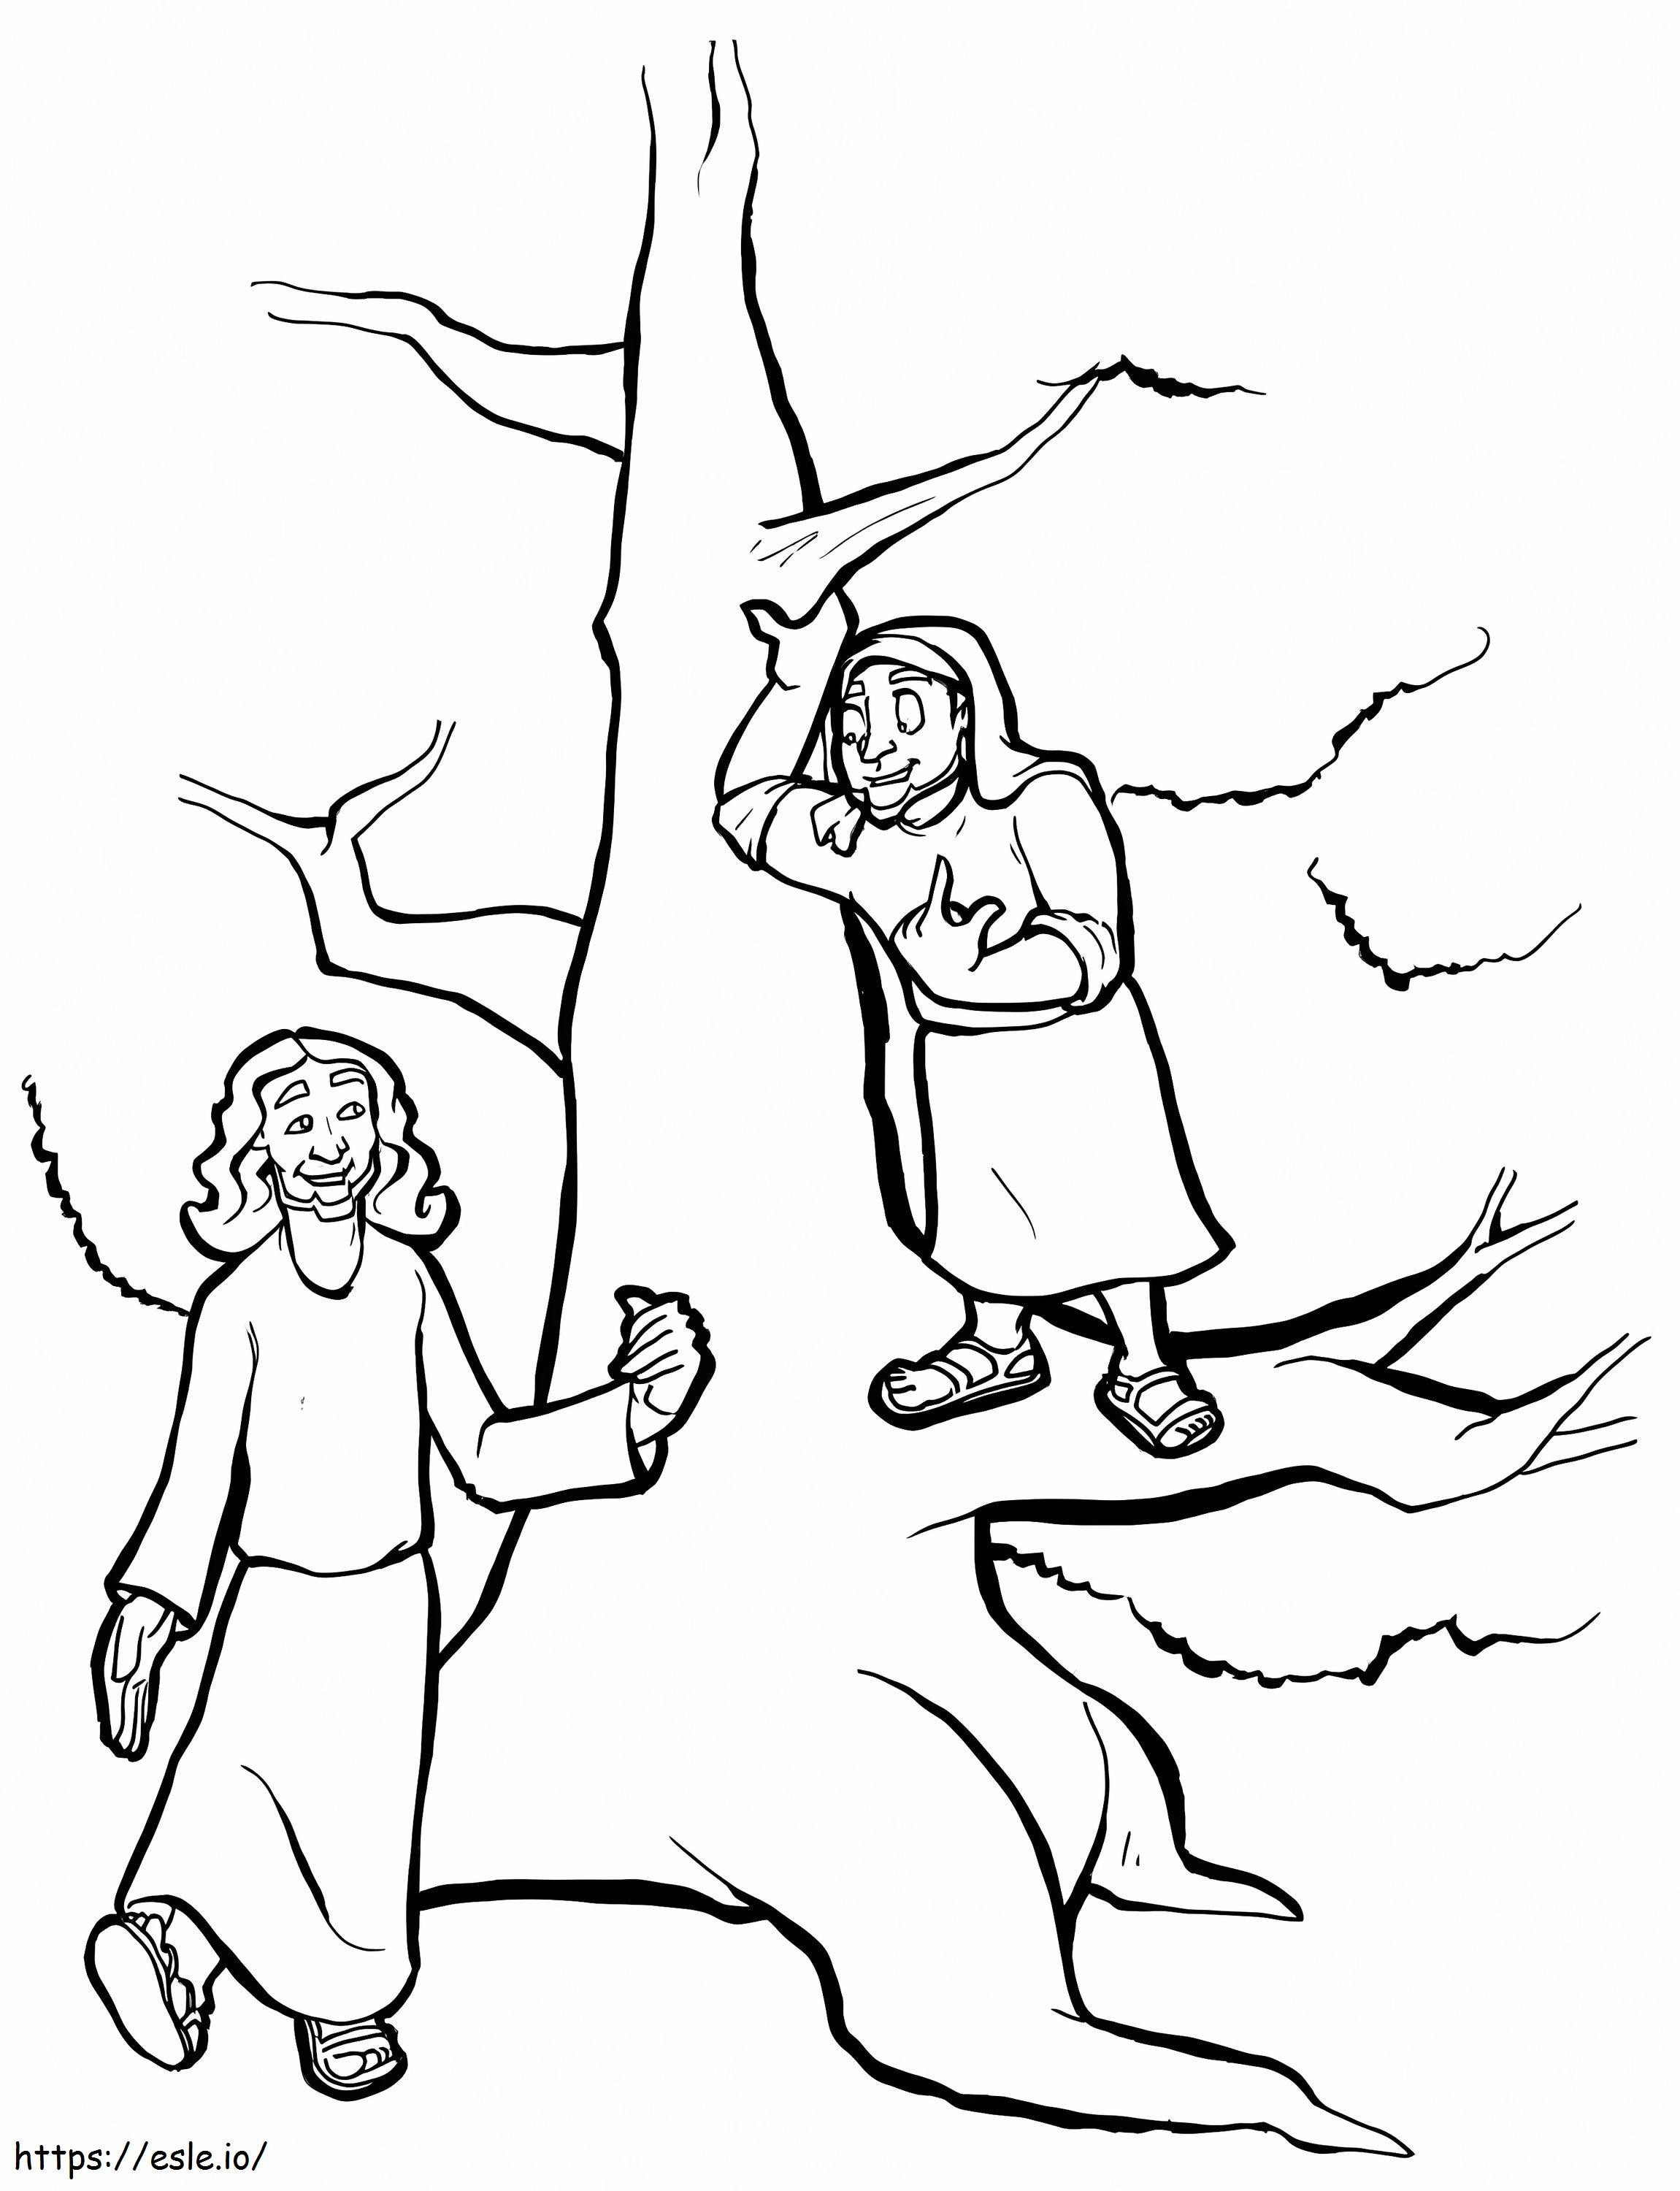 Jesus On The Tree And Zacchaeus 1 coloring page